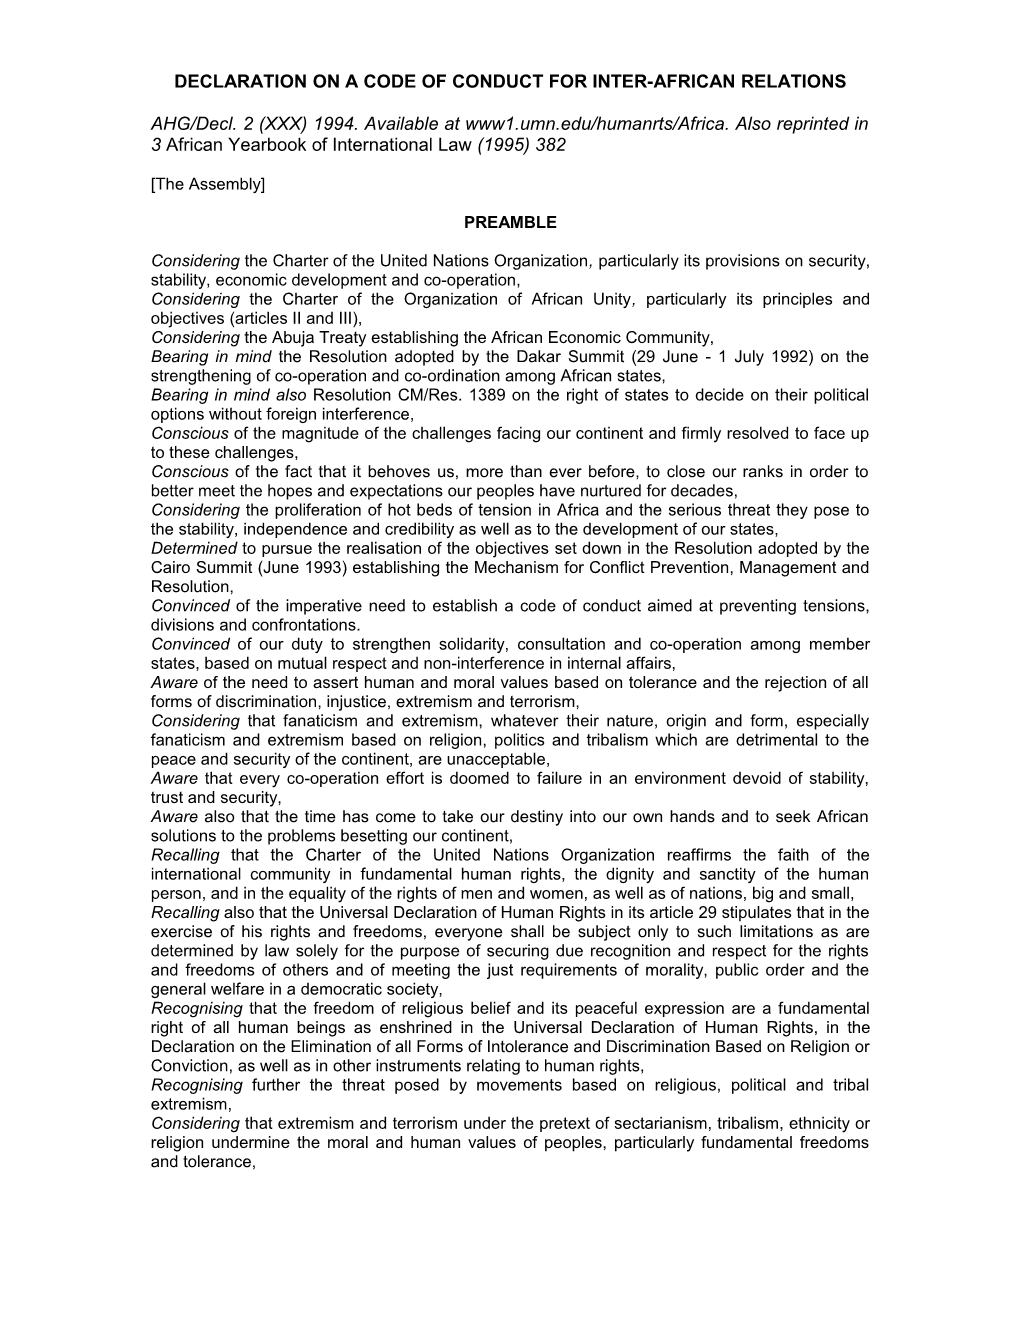 Declaration on a Code of Conduct for Inter-African Relations